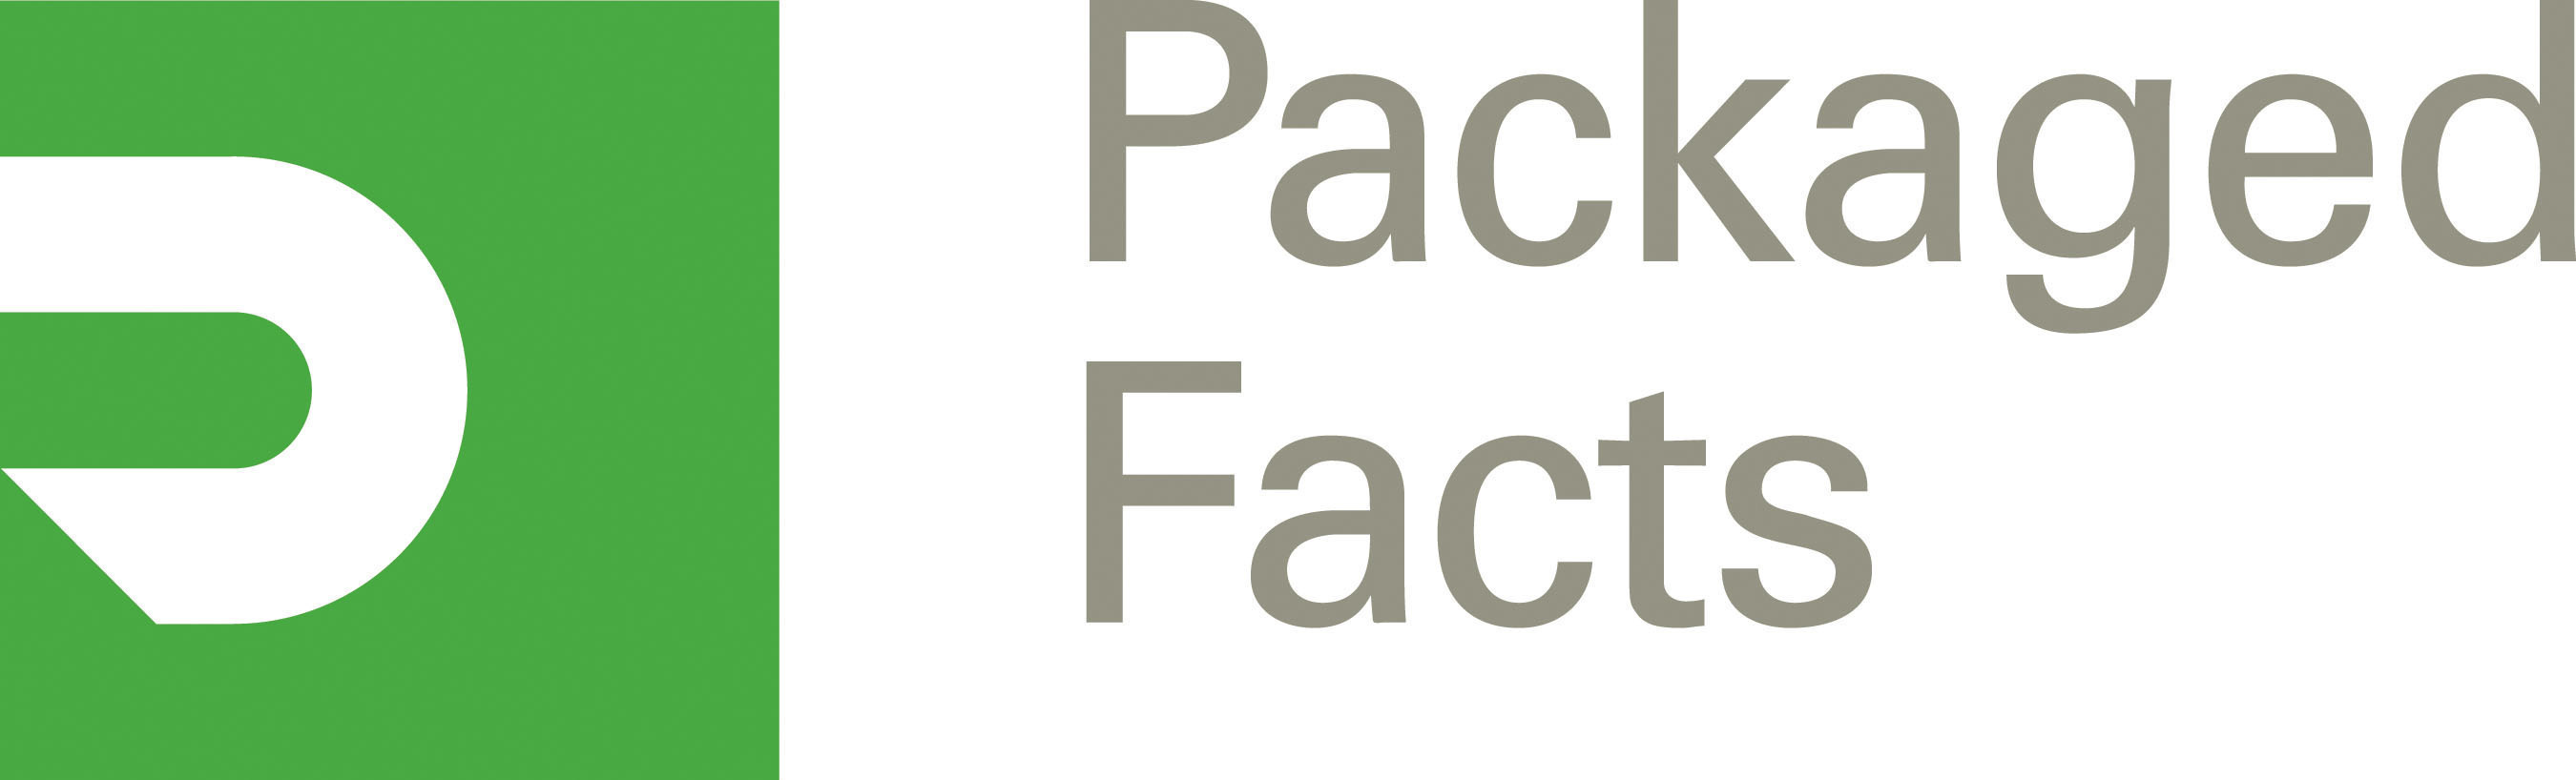 Packaged Facts Logo.